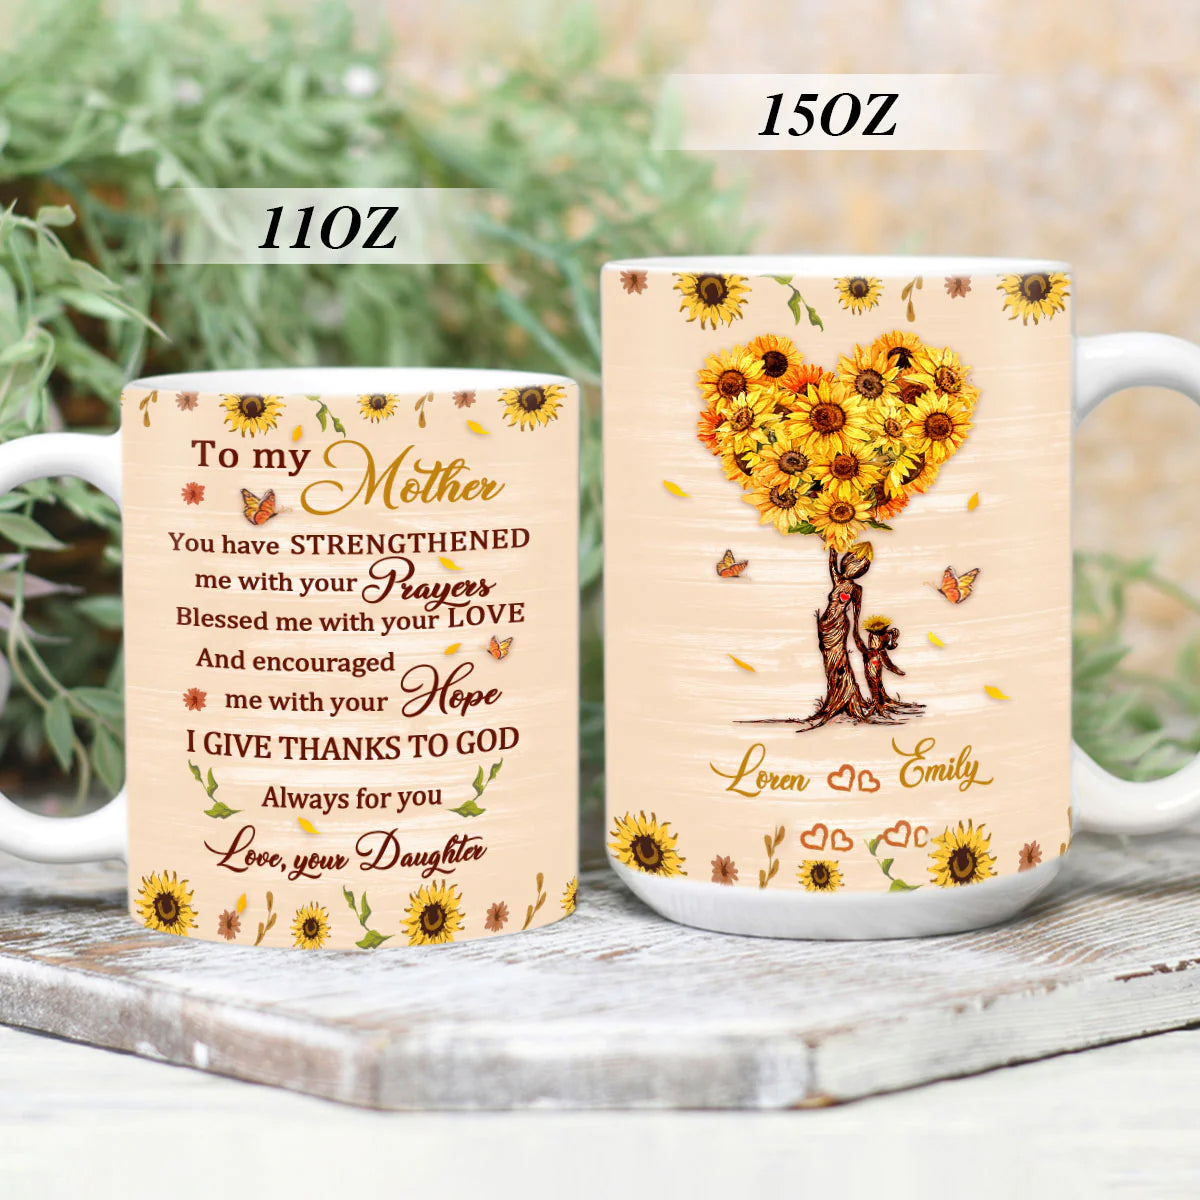 Christianartbag Drinkware, To My Mother You Have Strengthened, Personalized Mug, Tumbler, Personalized Gift for Mom. - Christian Art Bag